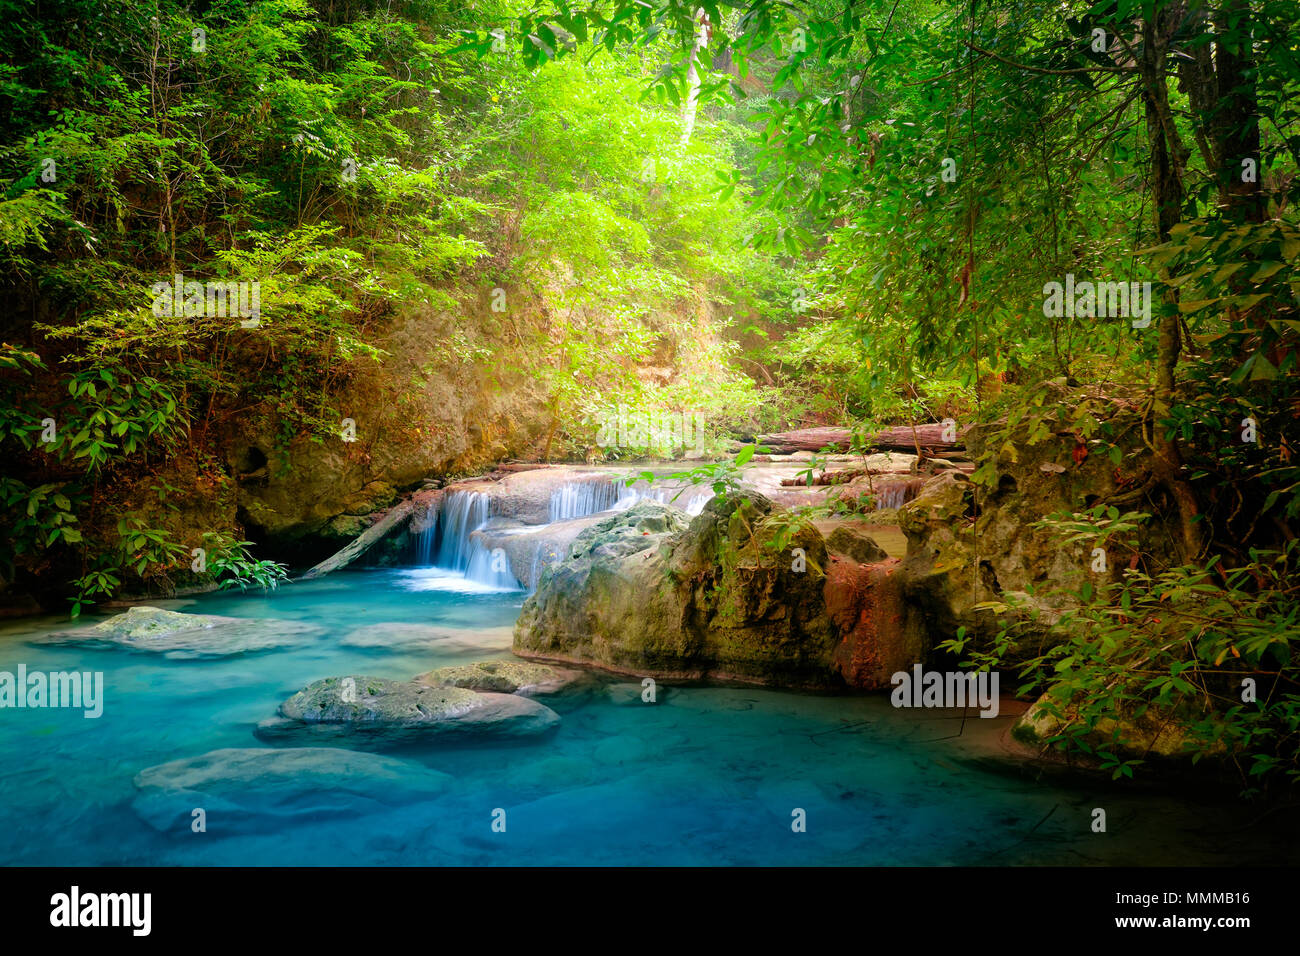 Jangle landscape with flowing turquoise water of Erawan cascade waterfall at deep tropical rain forest. National Park Kanchanaburi, Thailand Stock Photo